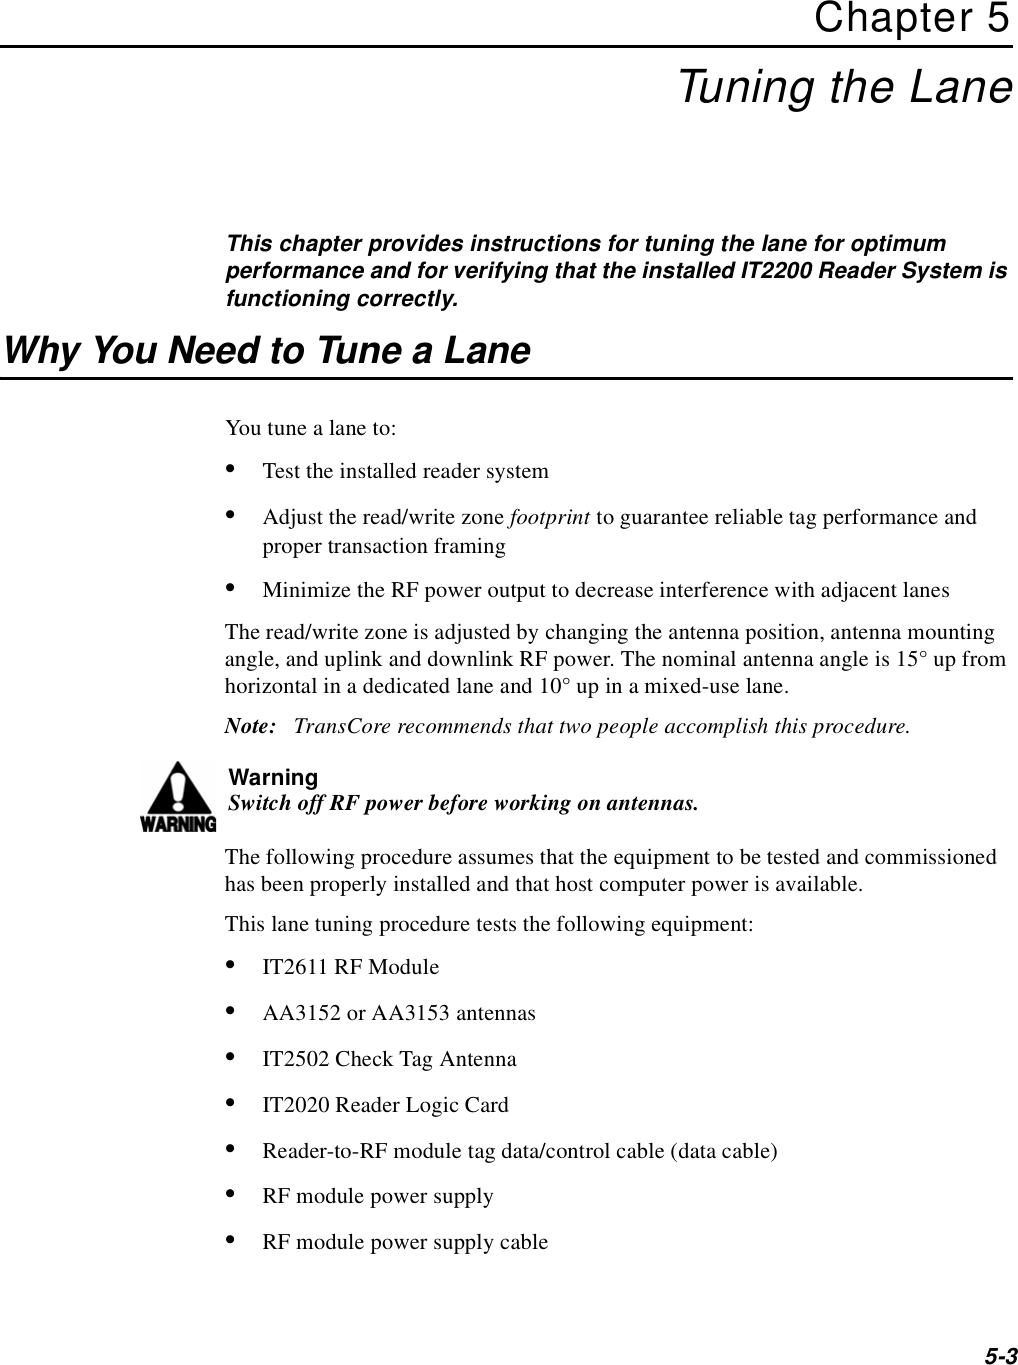 5-3Chapter 5Tuning the LaneThis chapter provides instructions for tuning the lane for optimum performance and for verifying that the installed IT2200 Reader System is functioning correctly.Why You Need to Tune a LaneYou tune a lane to:•Test the installed reader system•Adjust the read/write zone footprint to guarantee reliable tag performance and proper transaction framing•Minimize the RF power output to decrease interference with adjacent lanesThe read/write zone is adjusted by changing the antenna position, antenna mounting angle, and uplink and downlink RF power. The nominal antenna angle is 15° up from horizontal in a dedicated lane and 10° up in a mixed-use lane.Note:   TransCore recommends that two people accomplish this procedure.WarningSwitch off RF power before working on antennas.The following procedure assumes that the equipment to be tested and commissioned has been properly installed and that host computer power is available. This lane tuning procedure tests the following equipment:•IT2611 RF Module•AA3152 or AA3153 antennas•IT2502 Check Tag Antenna•IT2020 Reader Logic Card•Reader-to-RF module tag data/control cable (data cable)•RF module power supply•RF module power supply cable